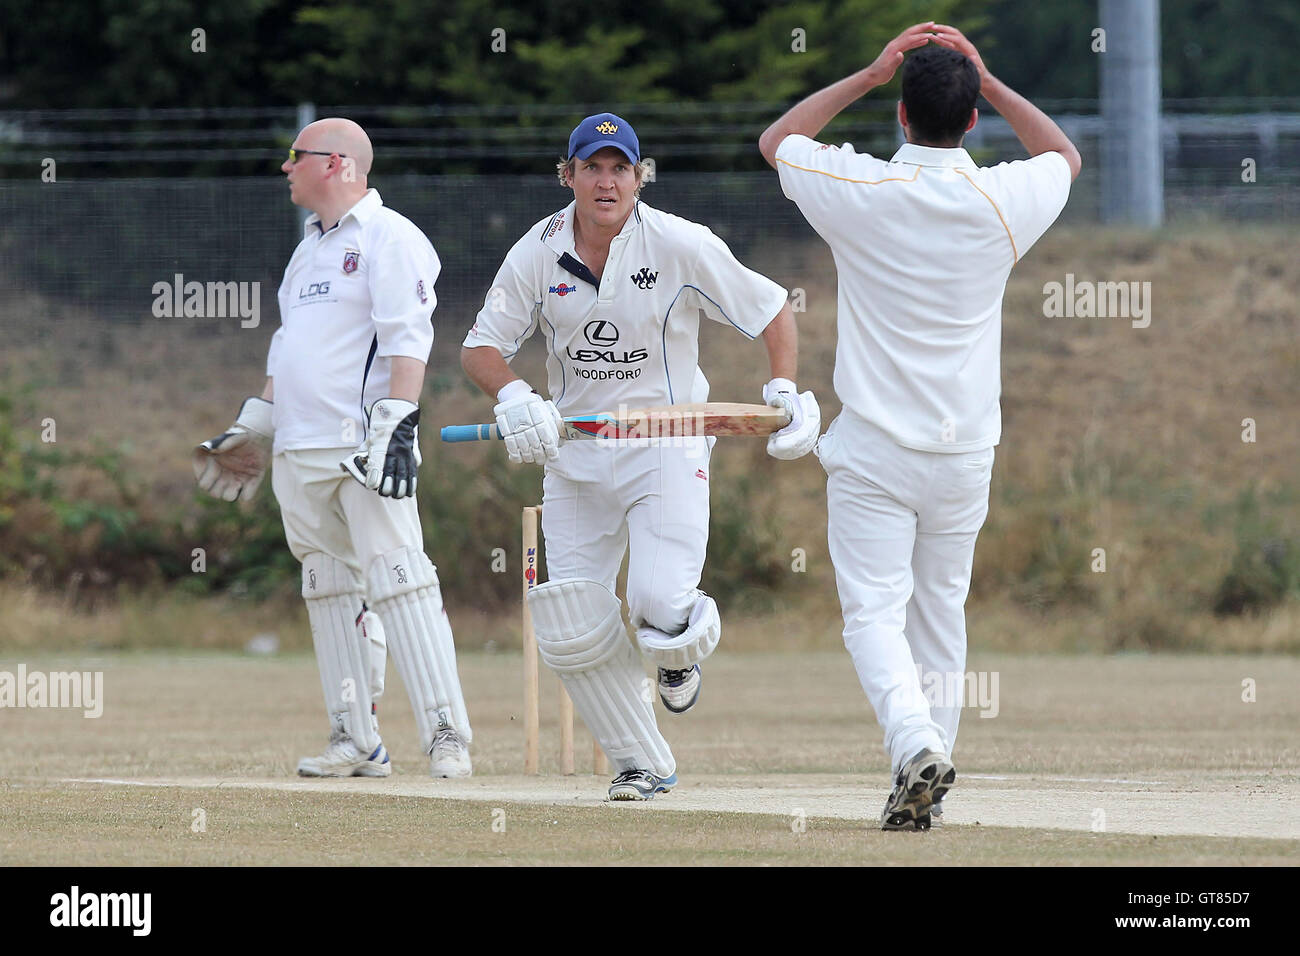 Another run for A Baars of Woodford Wells - Hainault & Clayhall CC vs Woodford Wells CC - Essex Cricket League - 13/07/13 Stock Photo